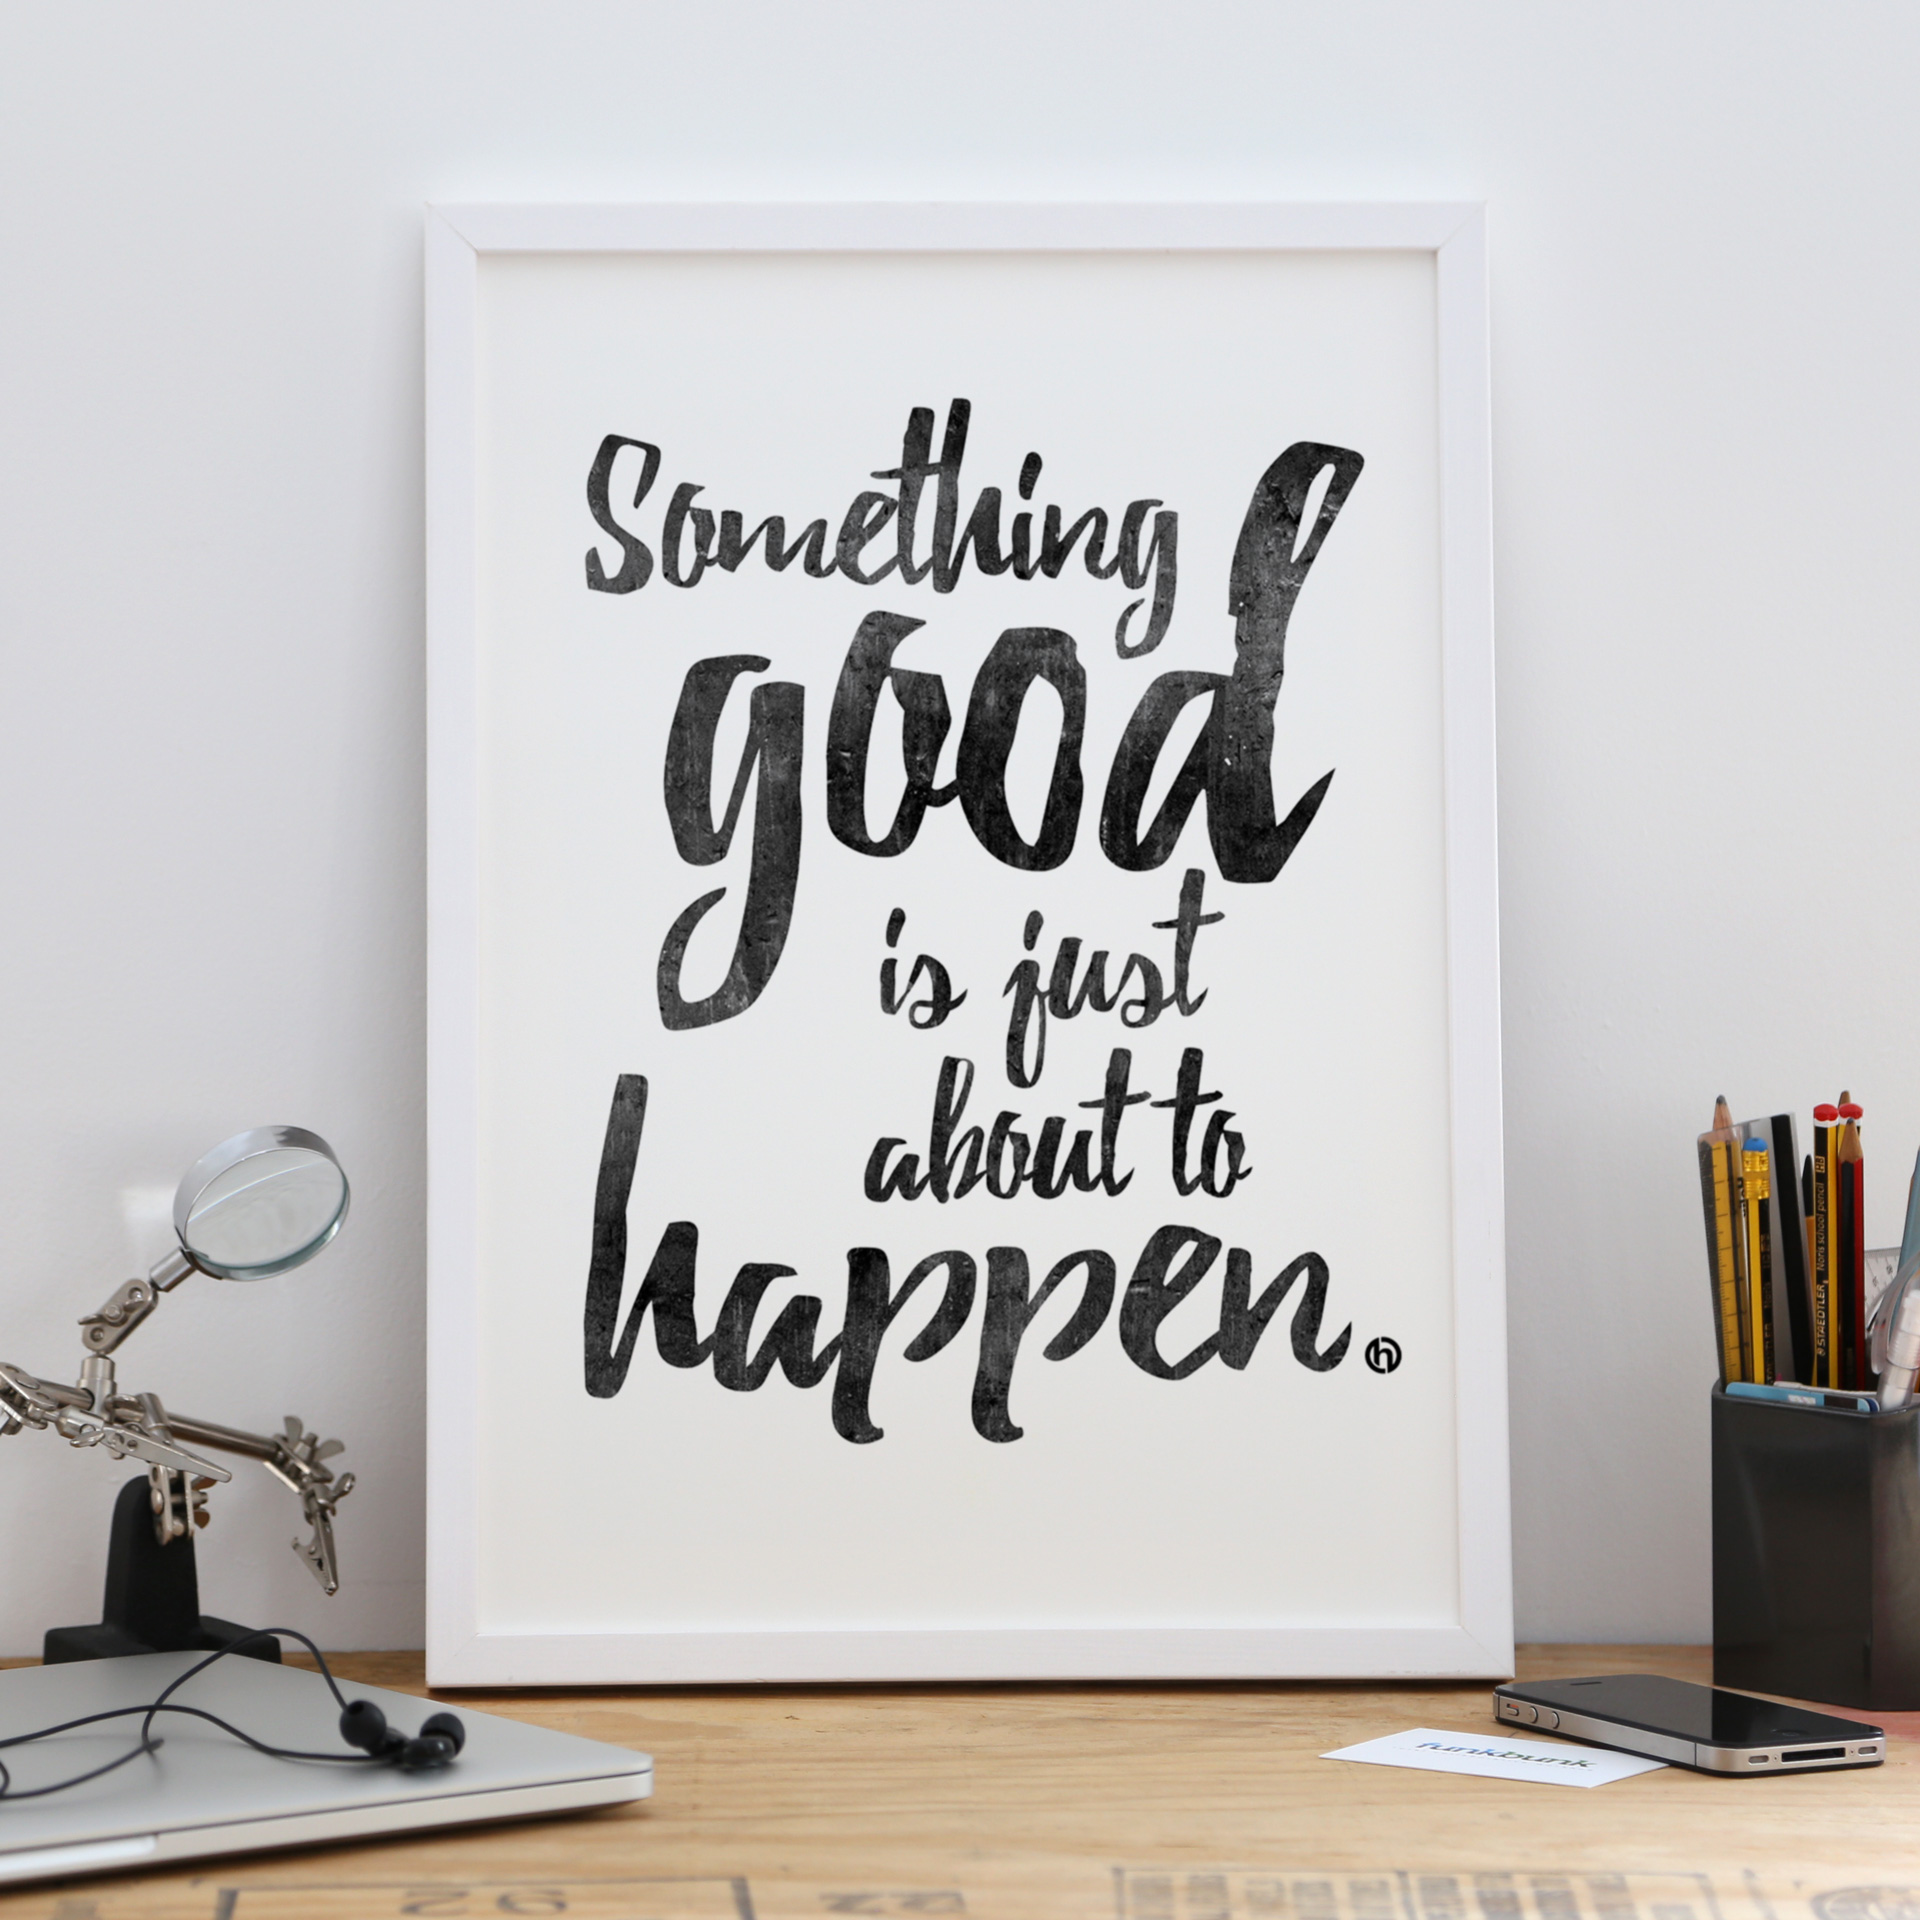 Motivational A3 poster prints - Something Good